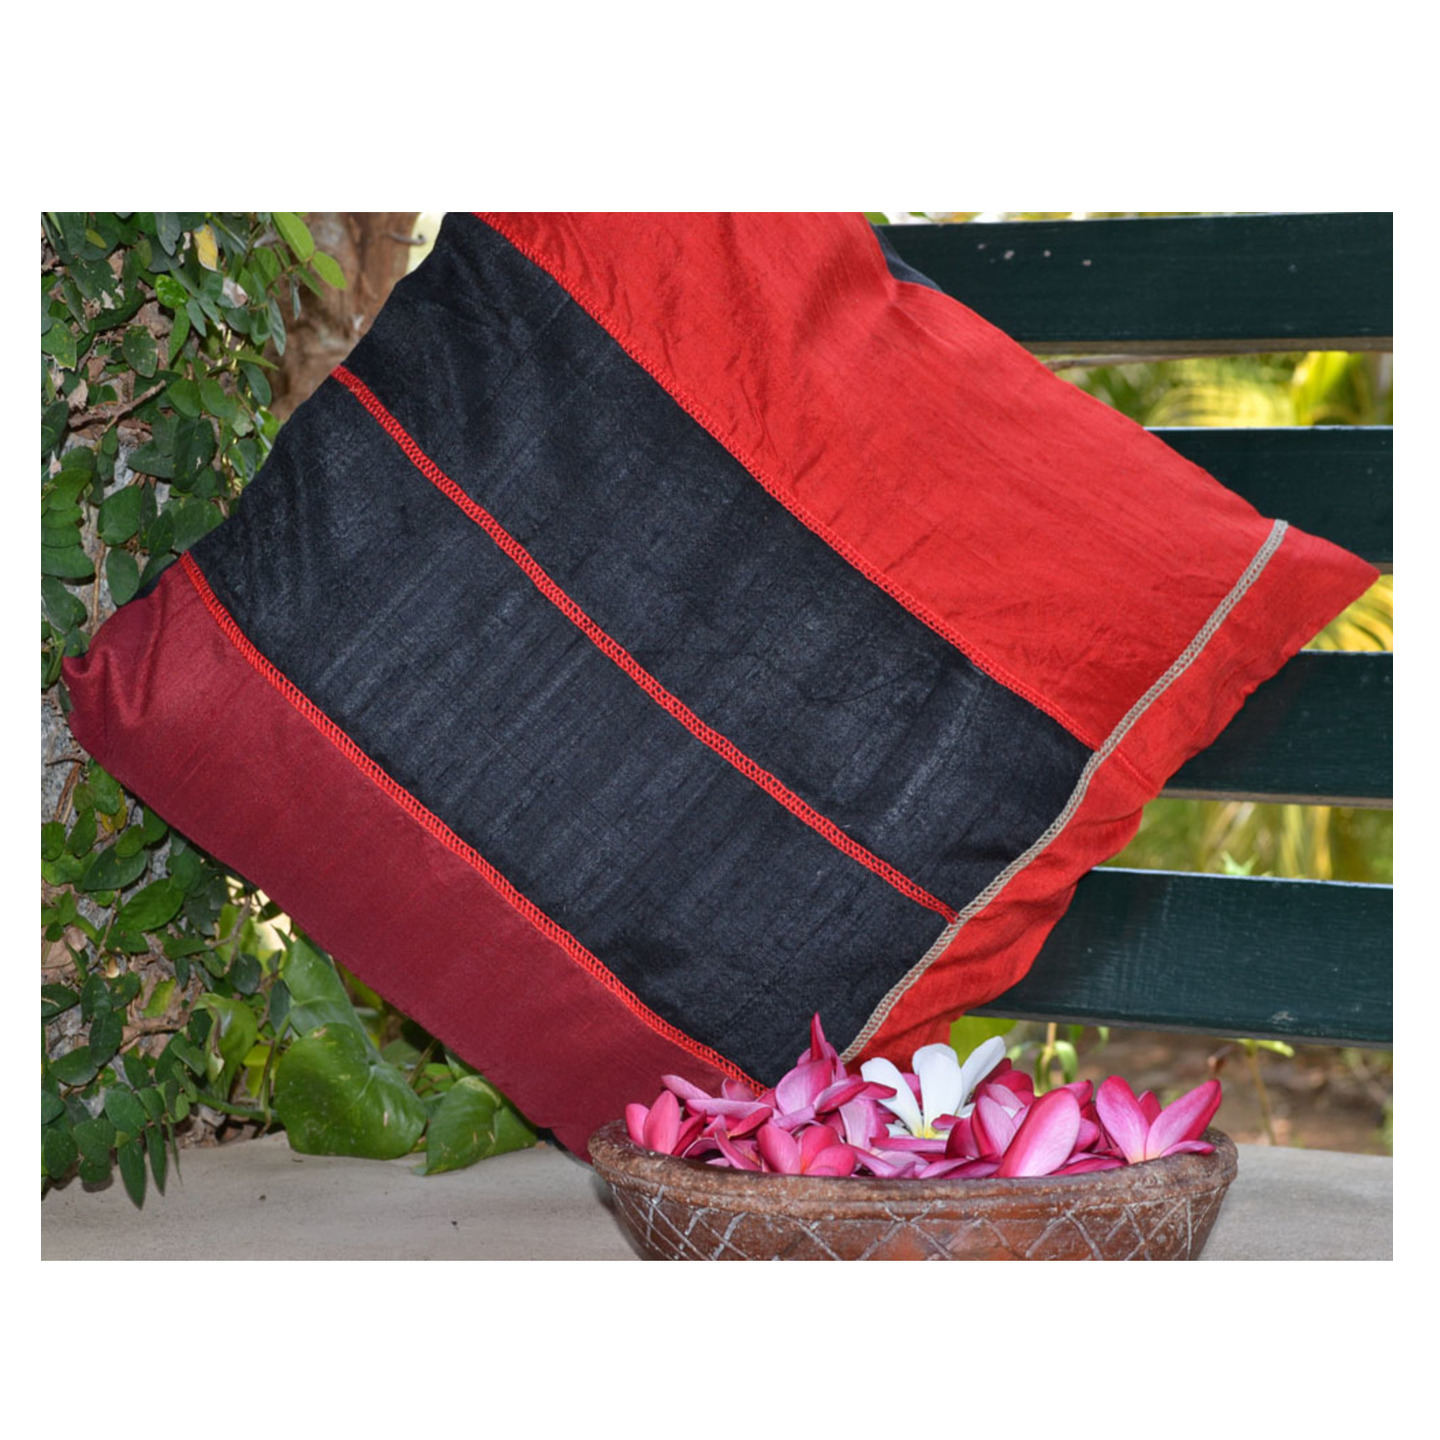 Shade of Red Cushion Covers - 2